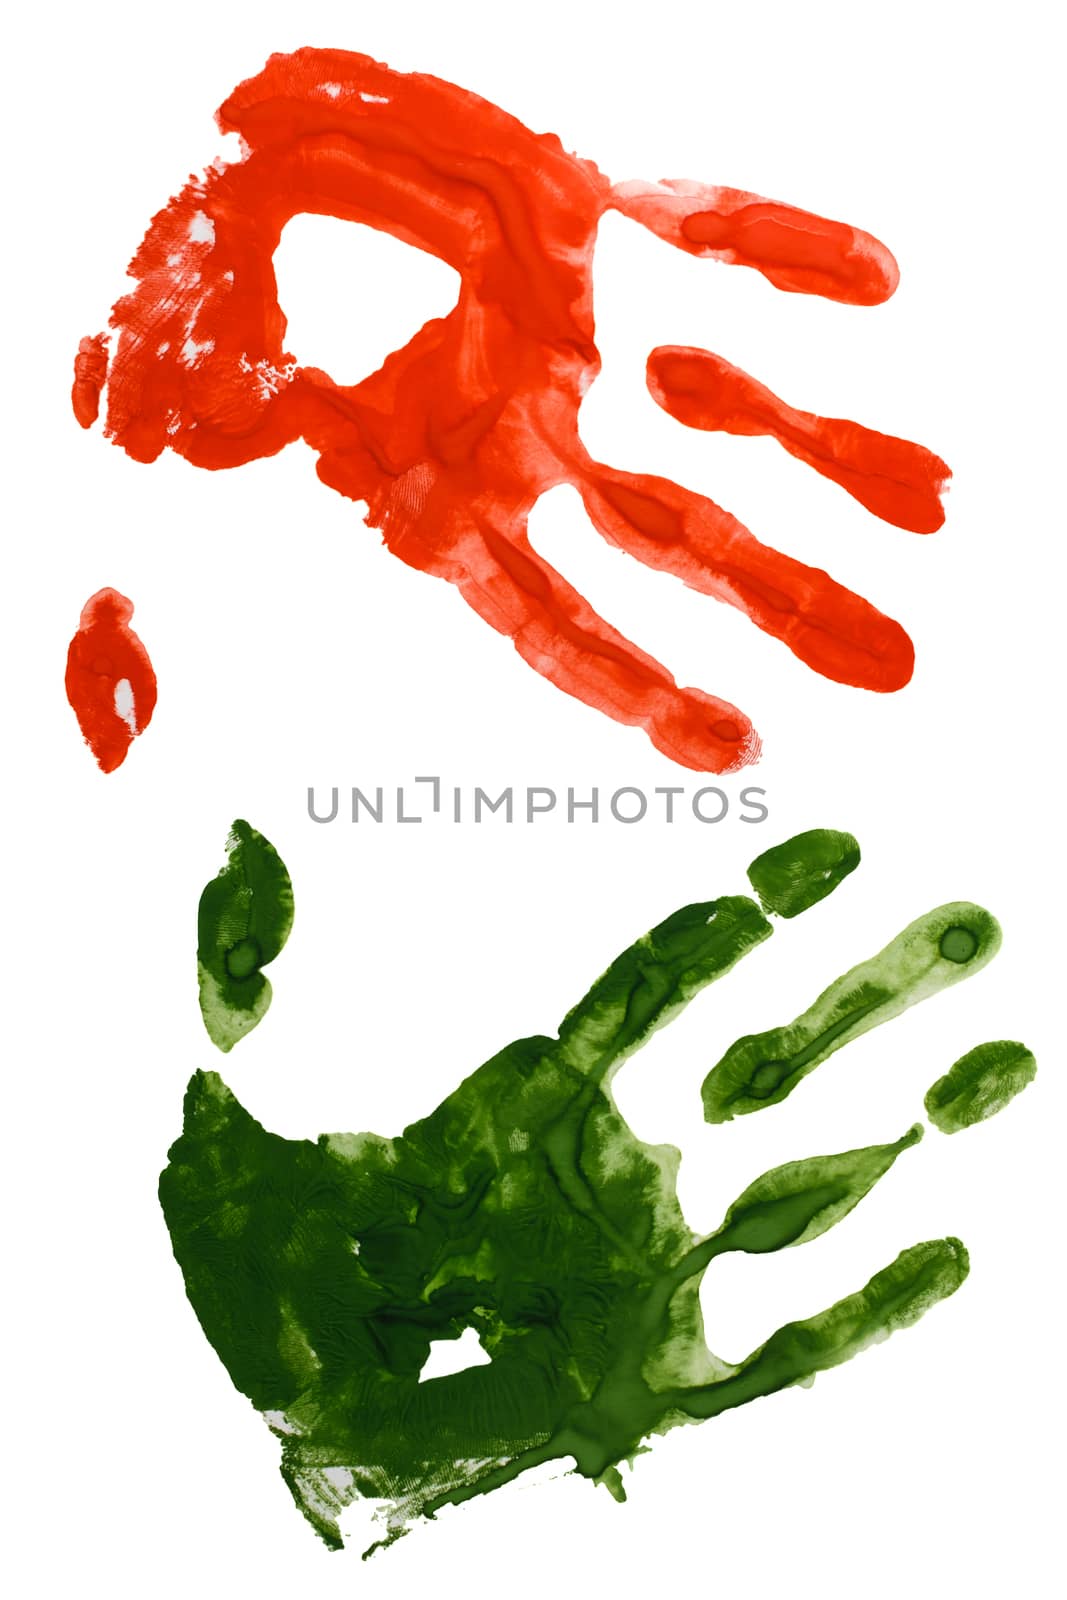 Prints Two Hands on White Background